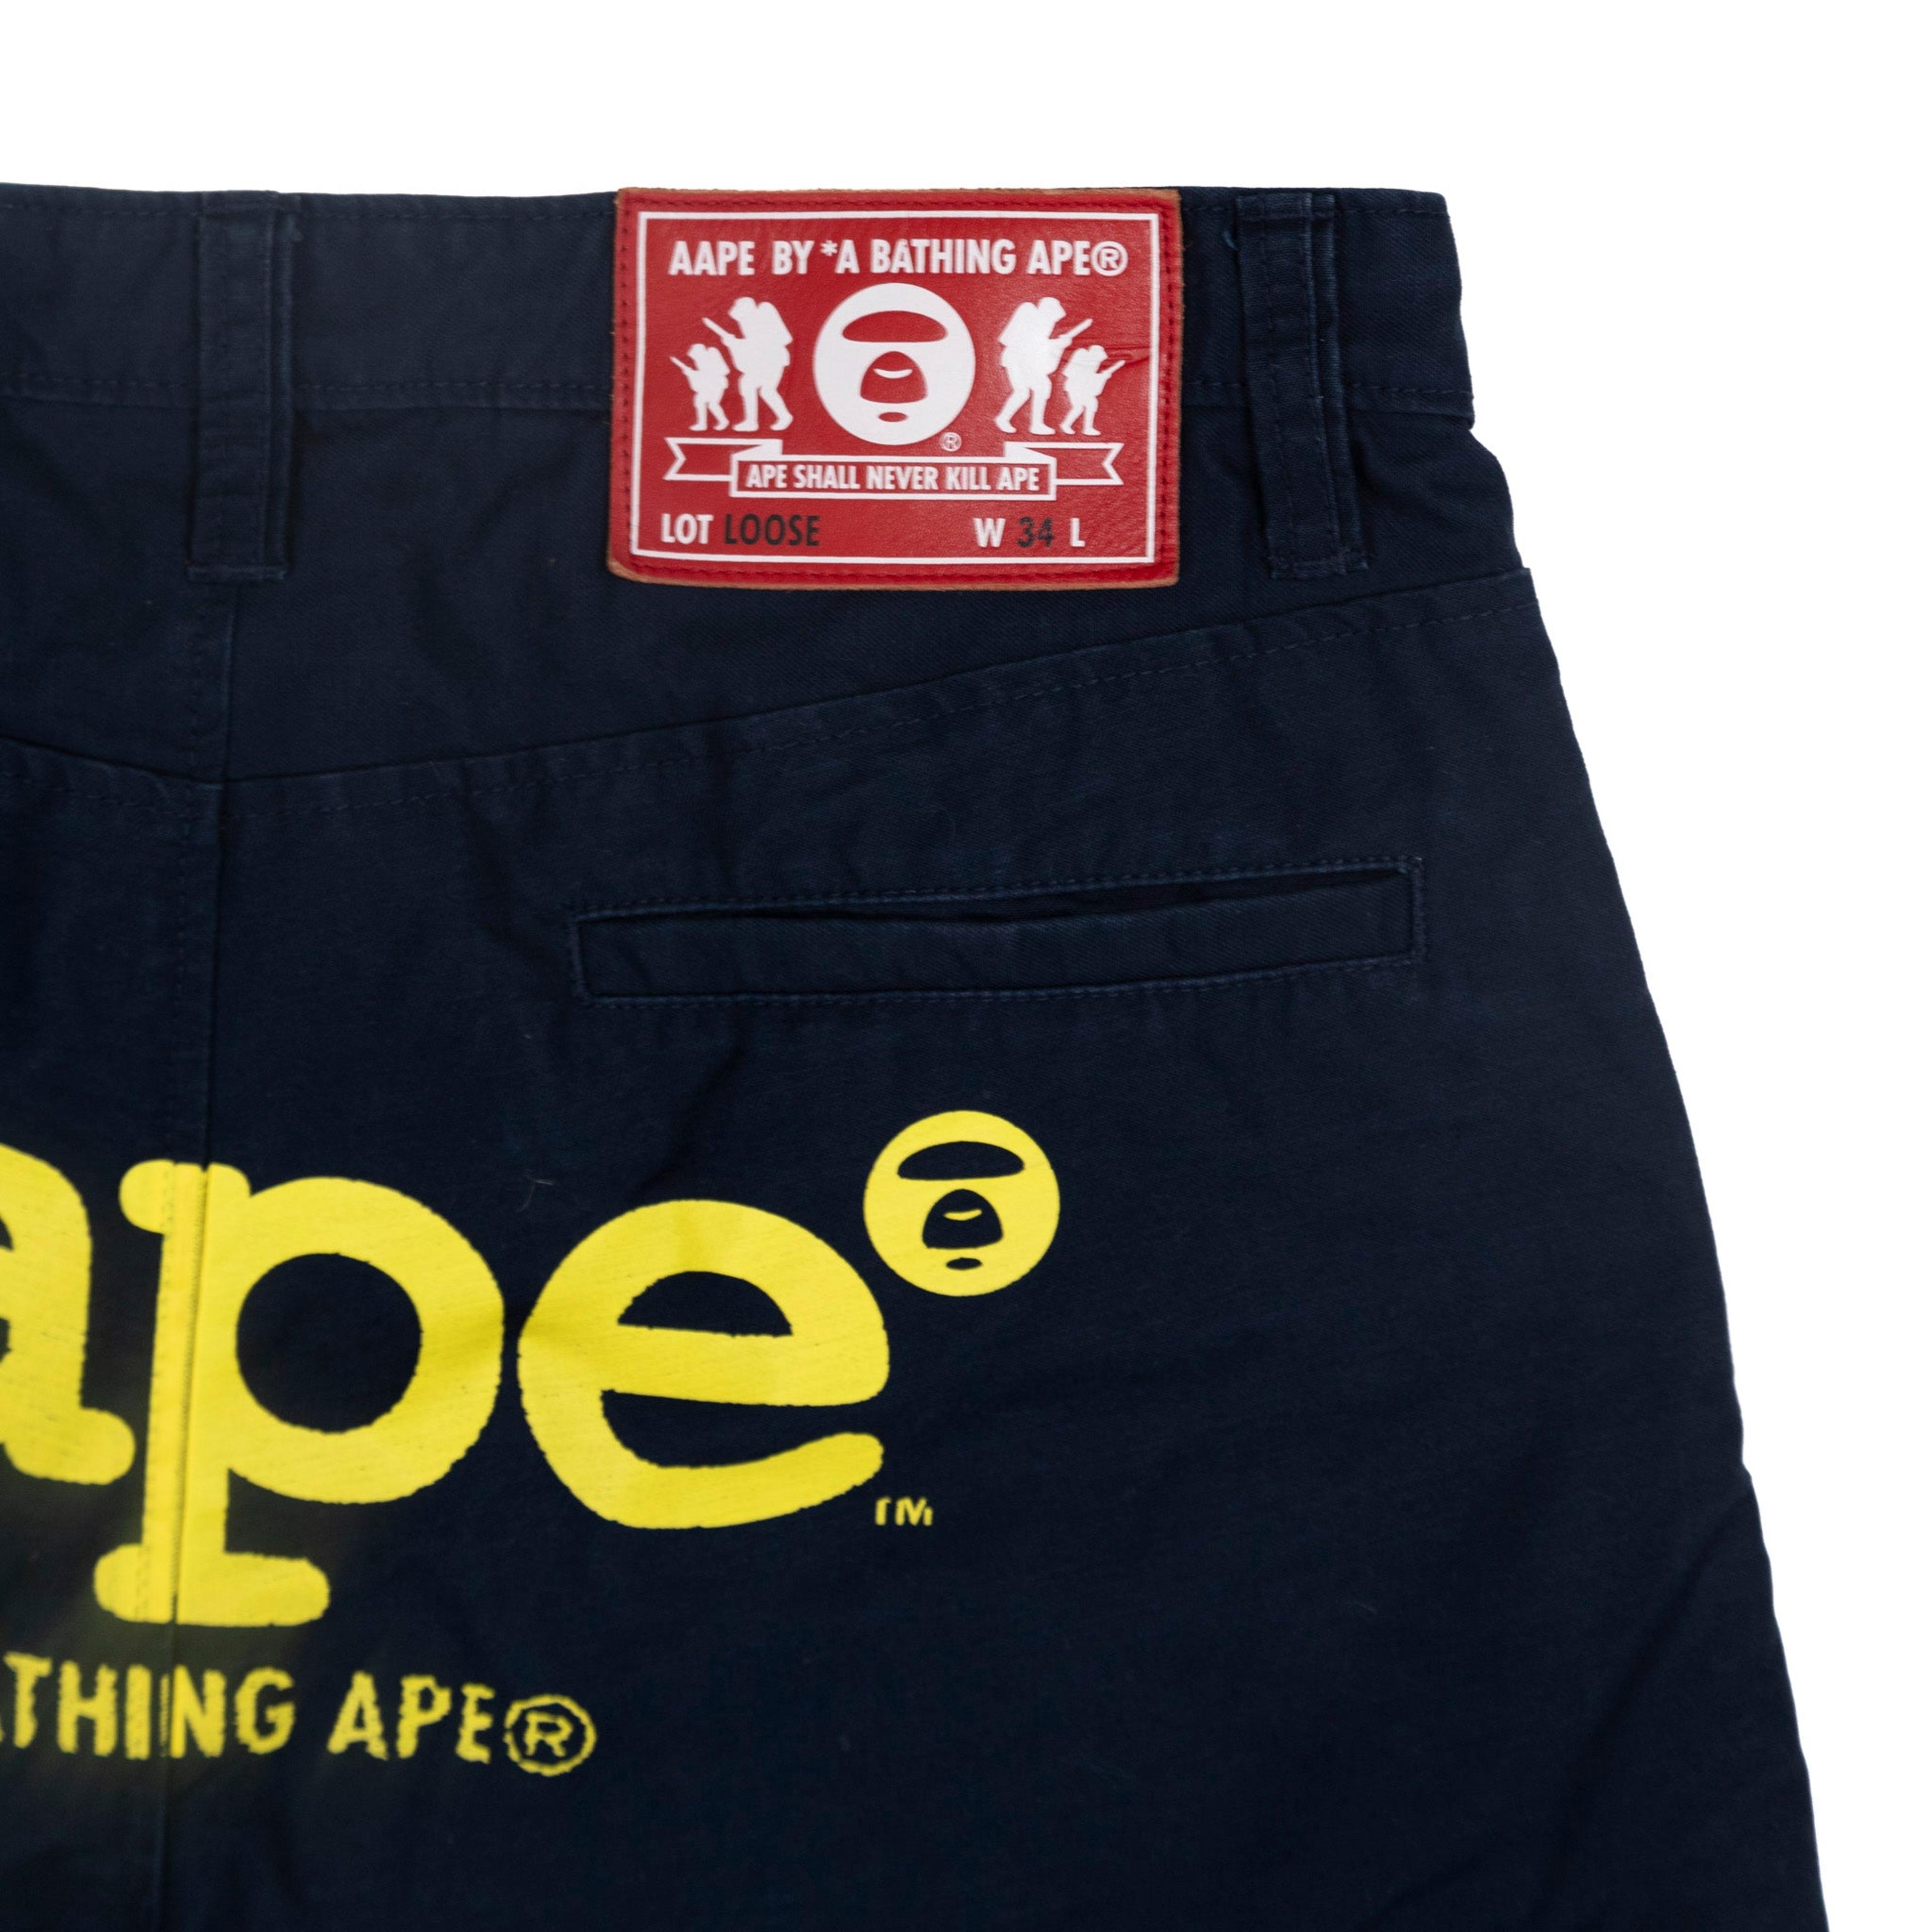 Alternate View 3 of Aape by A Bathing Ape Summer Shorts